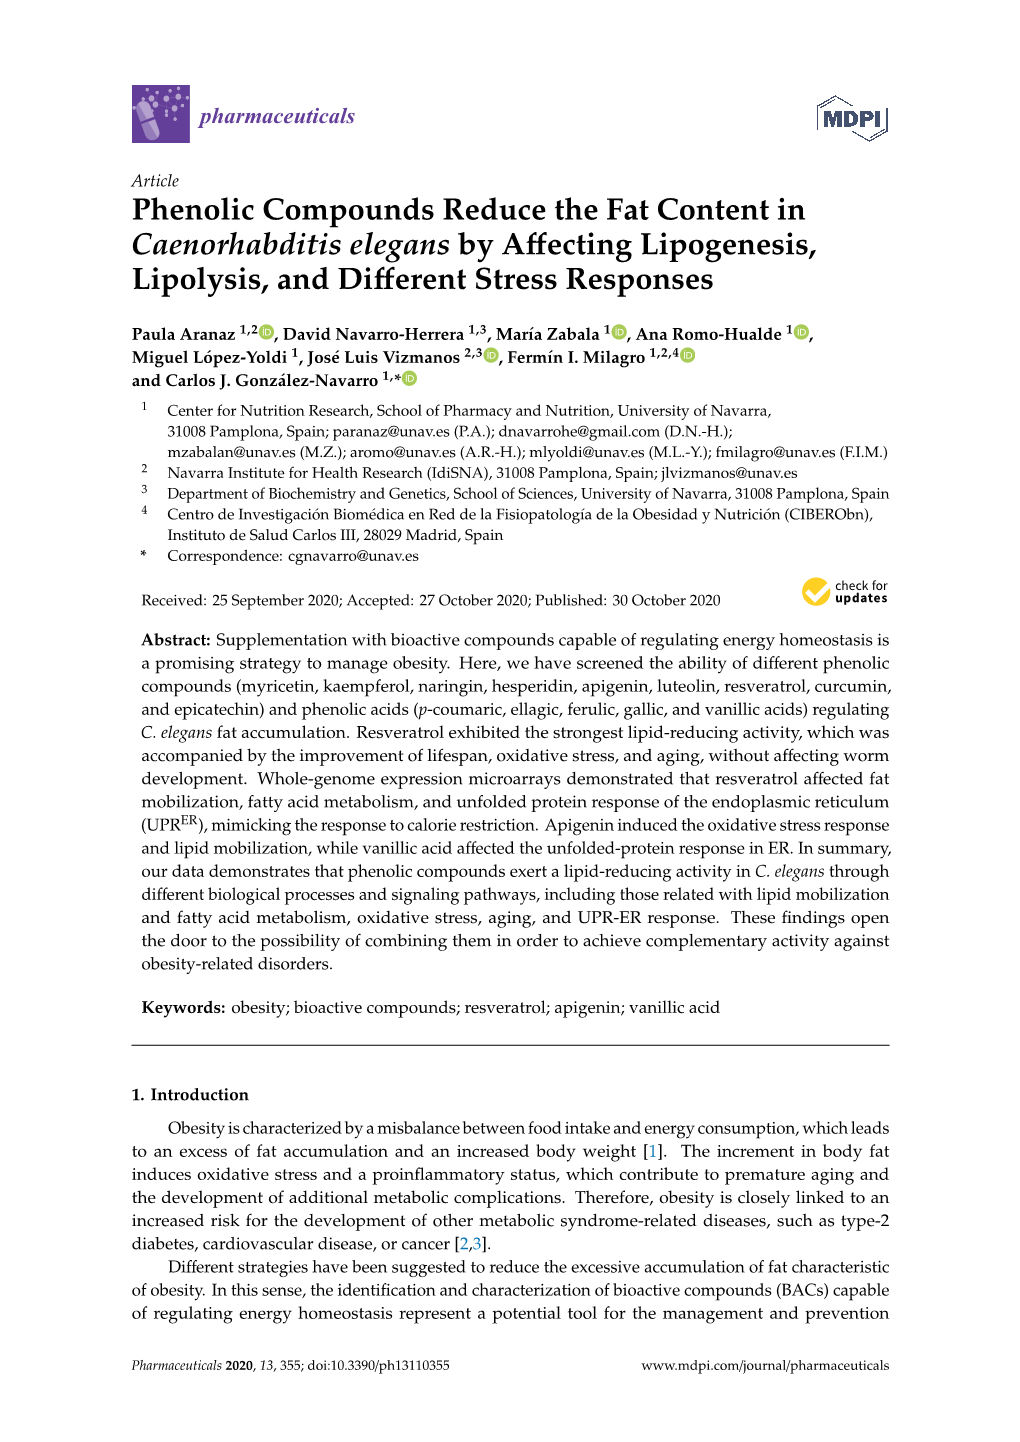 Phenolic Compounds Reduce the Fat Content in Caenorhabditis Elegans by Affecting Lipogenesis, Lipolysis, and Different Stress Re